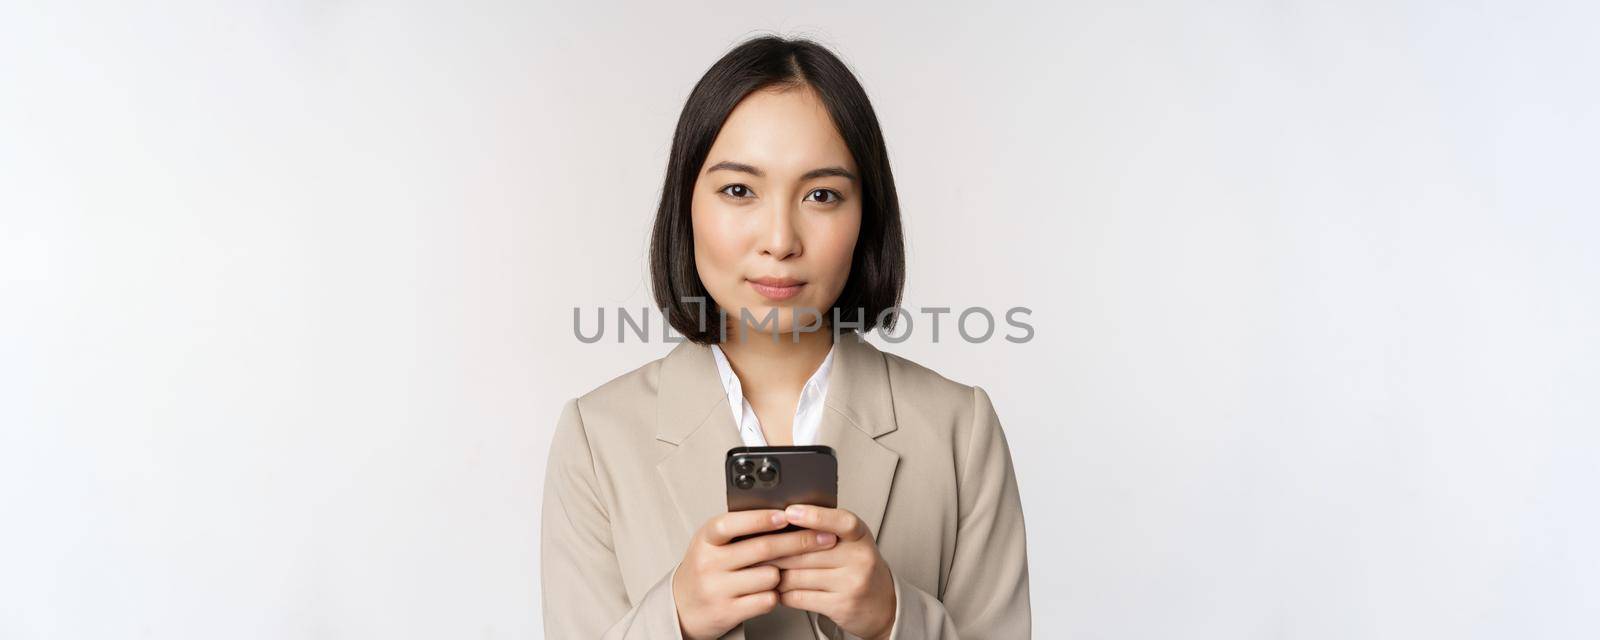 Image of asian businesswoman in suit, holding mobile phone, using smartphone app, smiling at camera, white background.